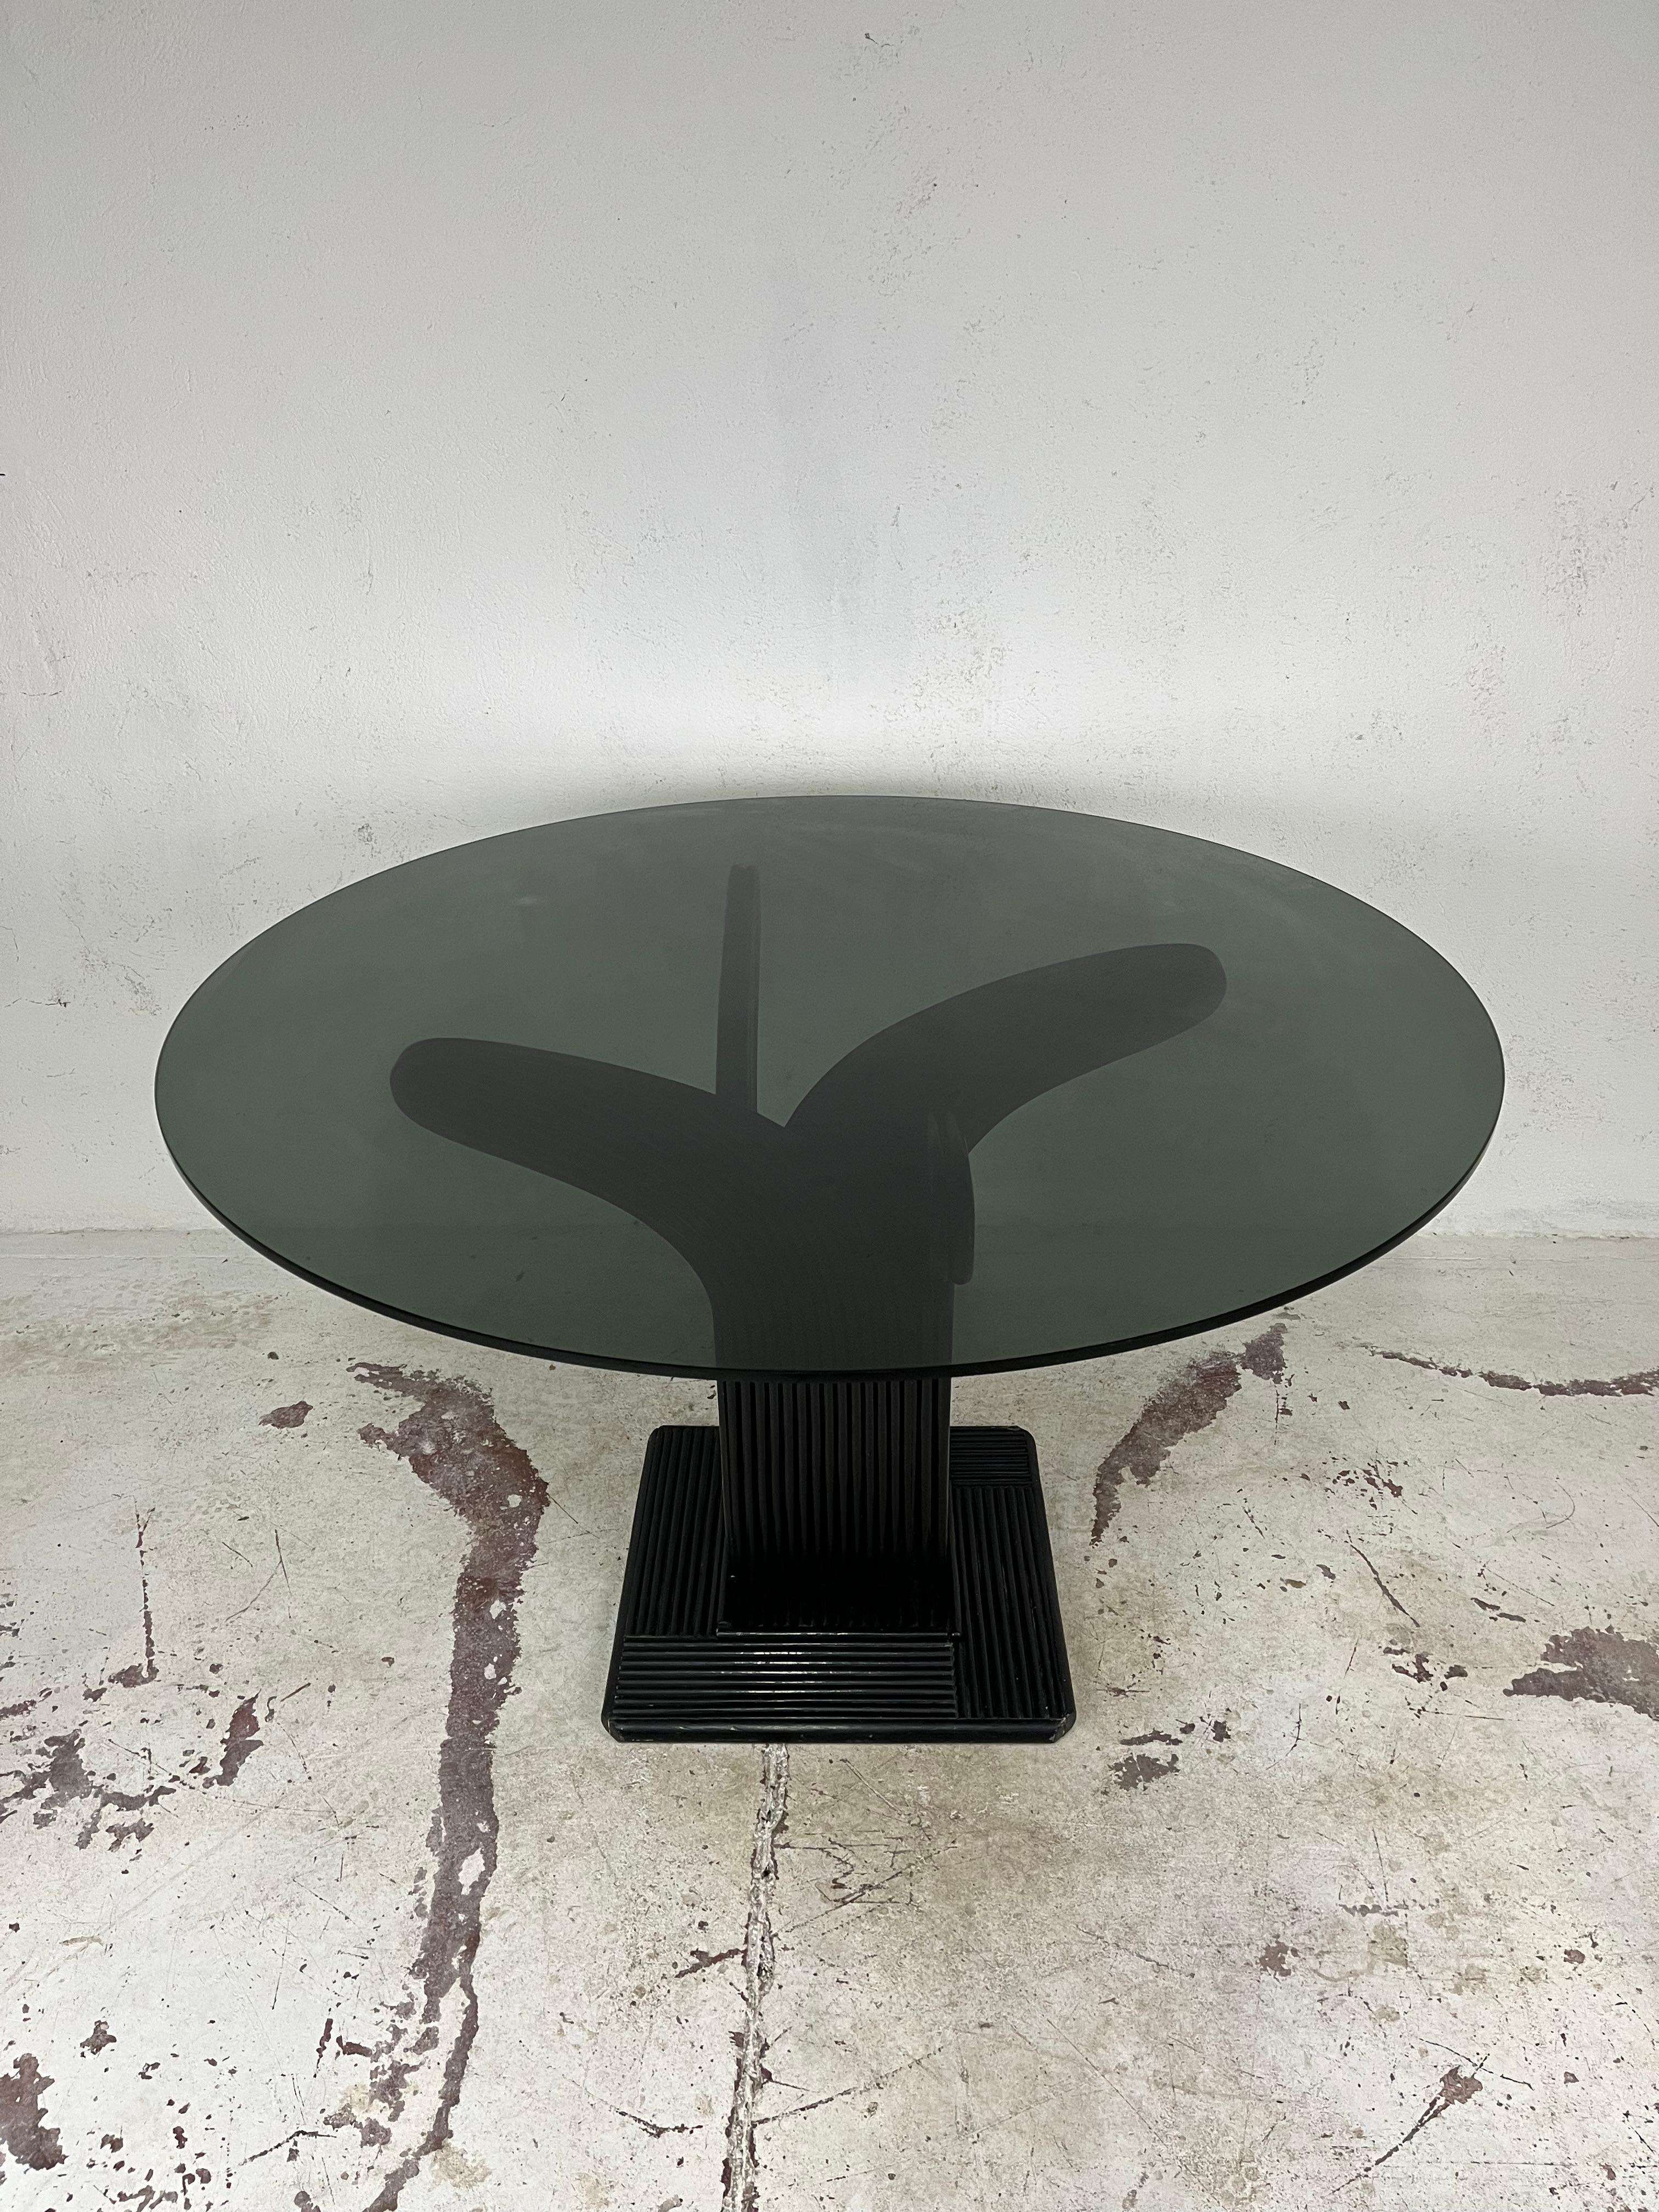 Beautiful table with finely crafted and curved bamboo and rattan frame with smoked glass top, designed by Maurizio Mariani and Giusto Purini for Vivai del Sud in the 1970s.

The table has been thoroughly cleaned, is in excellent condition, the glass